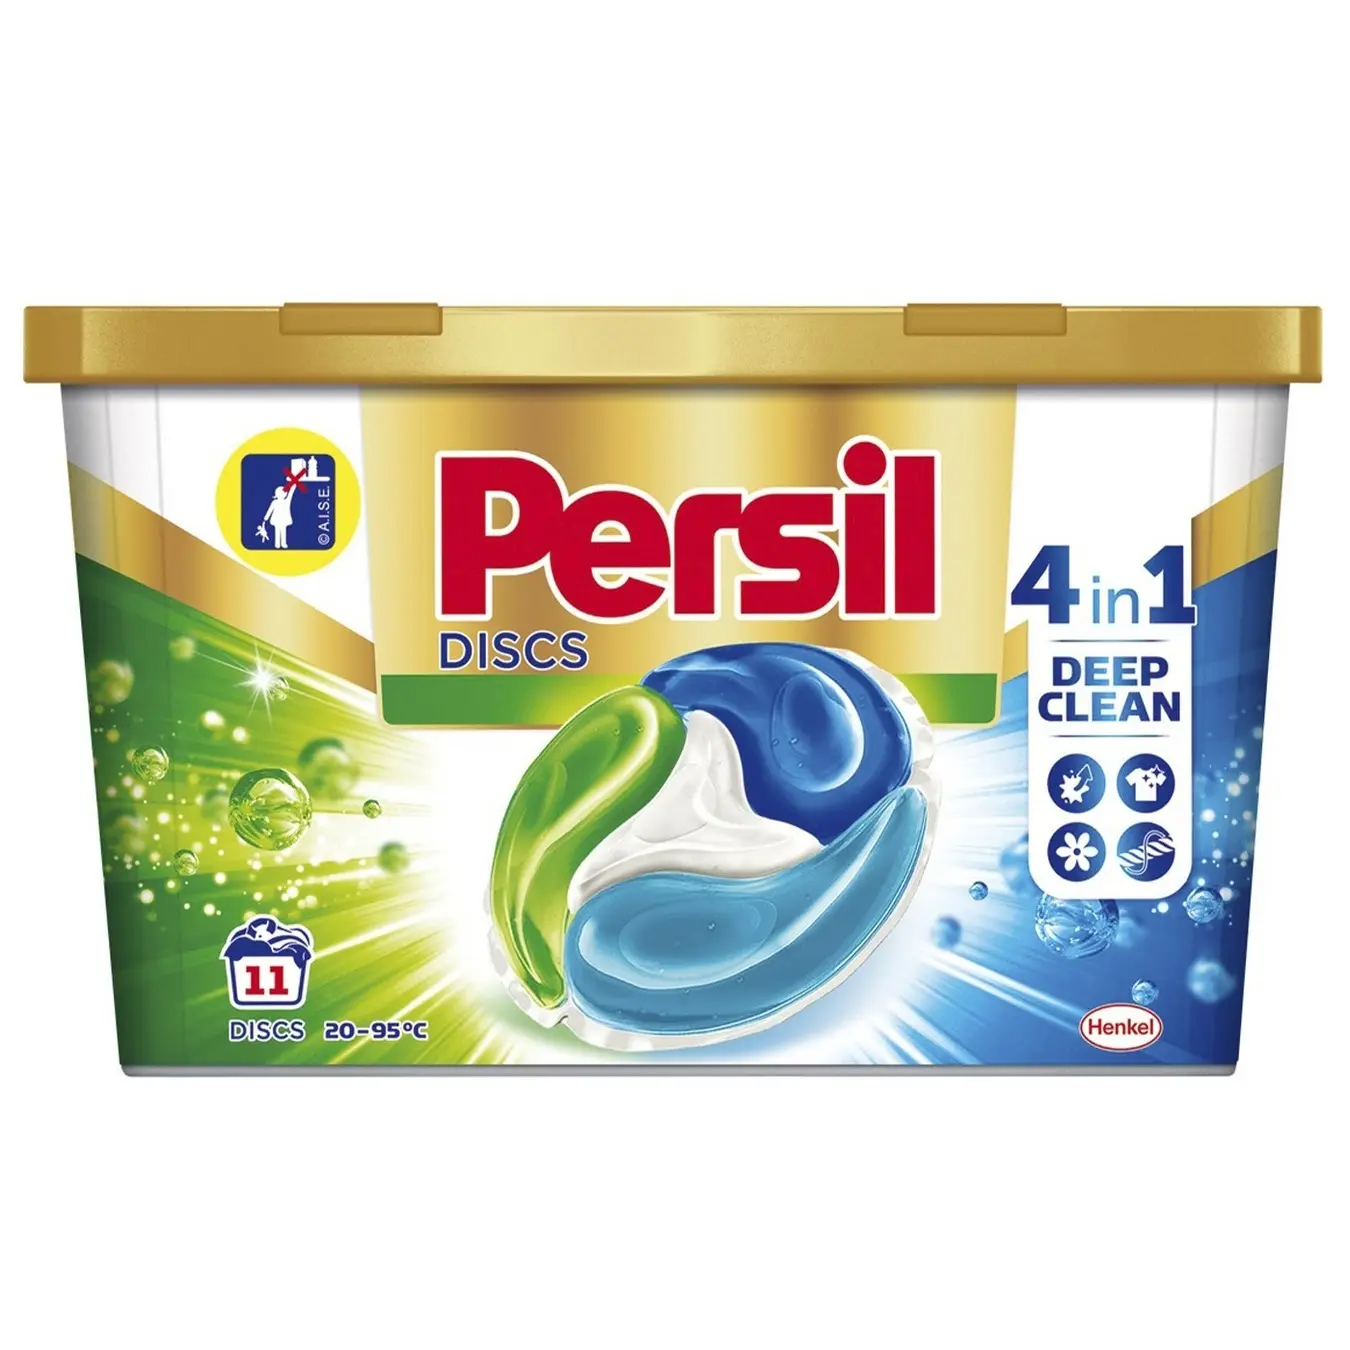 PERSIL Washing Capsules 4-in-1 Deep Clean Plus Colour 38 washes, 950g - Washing Capsules